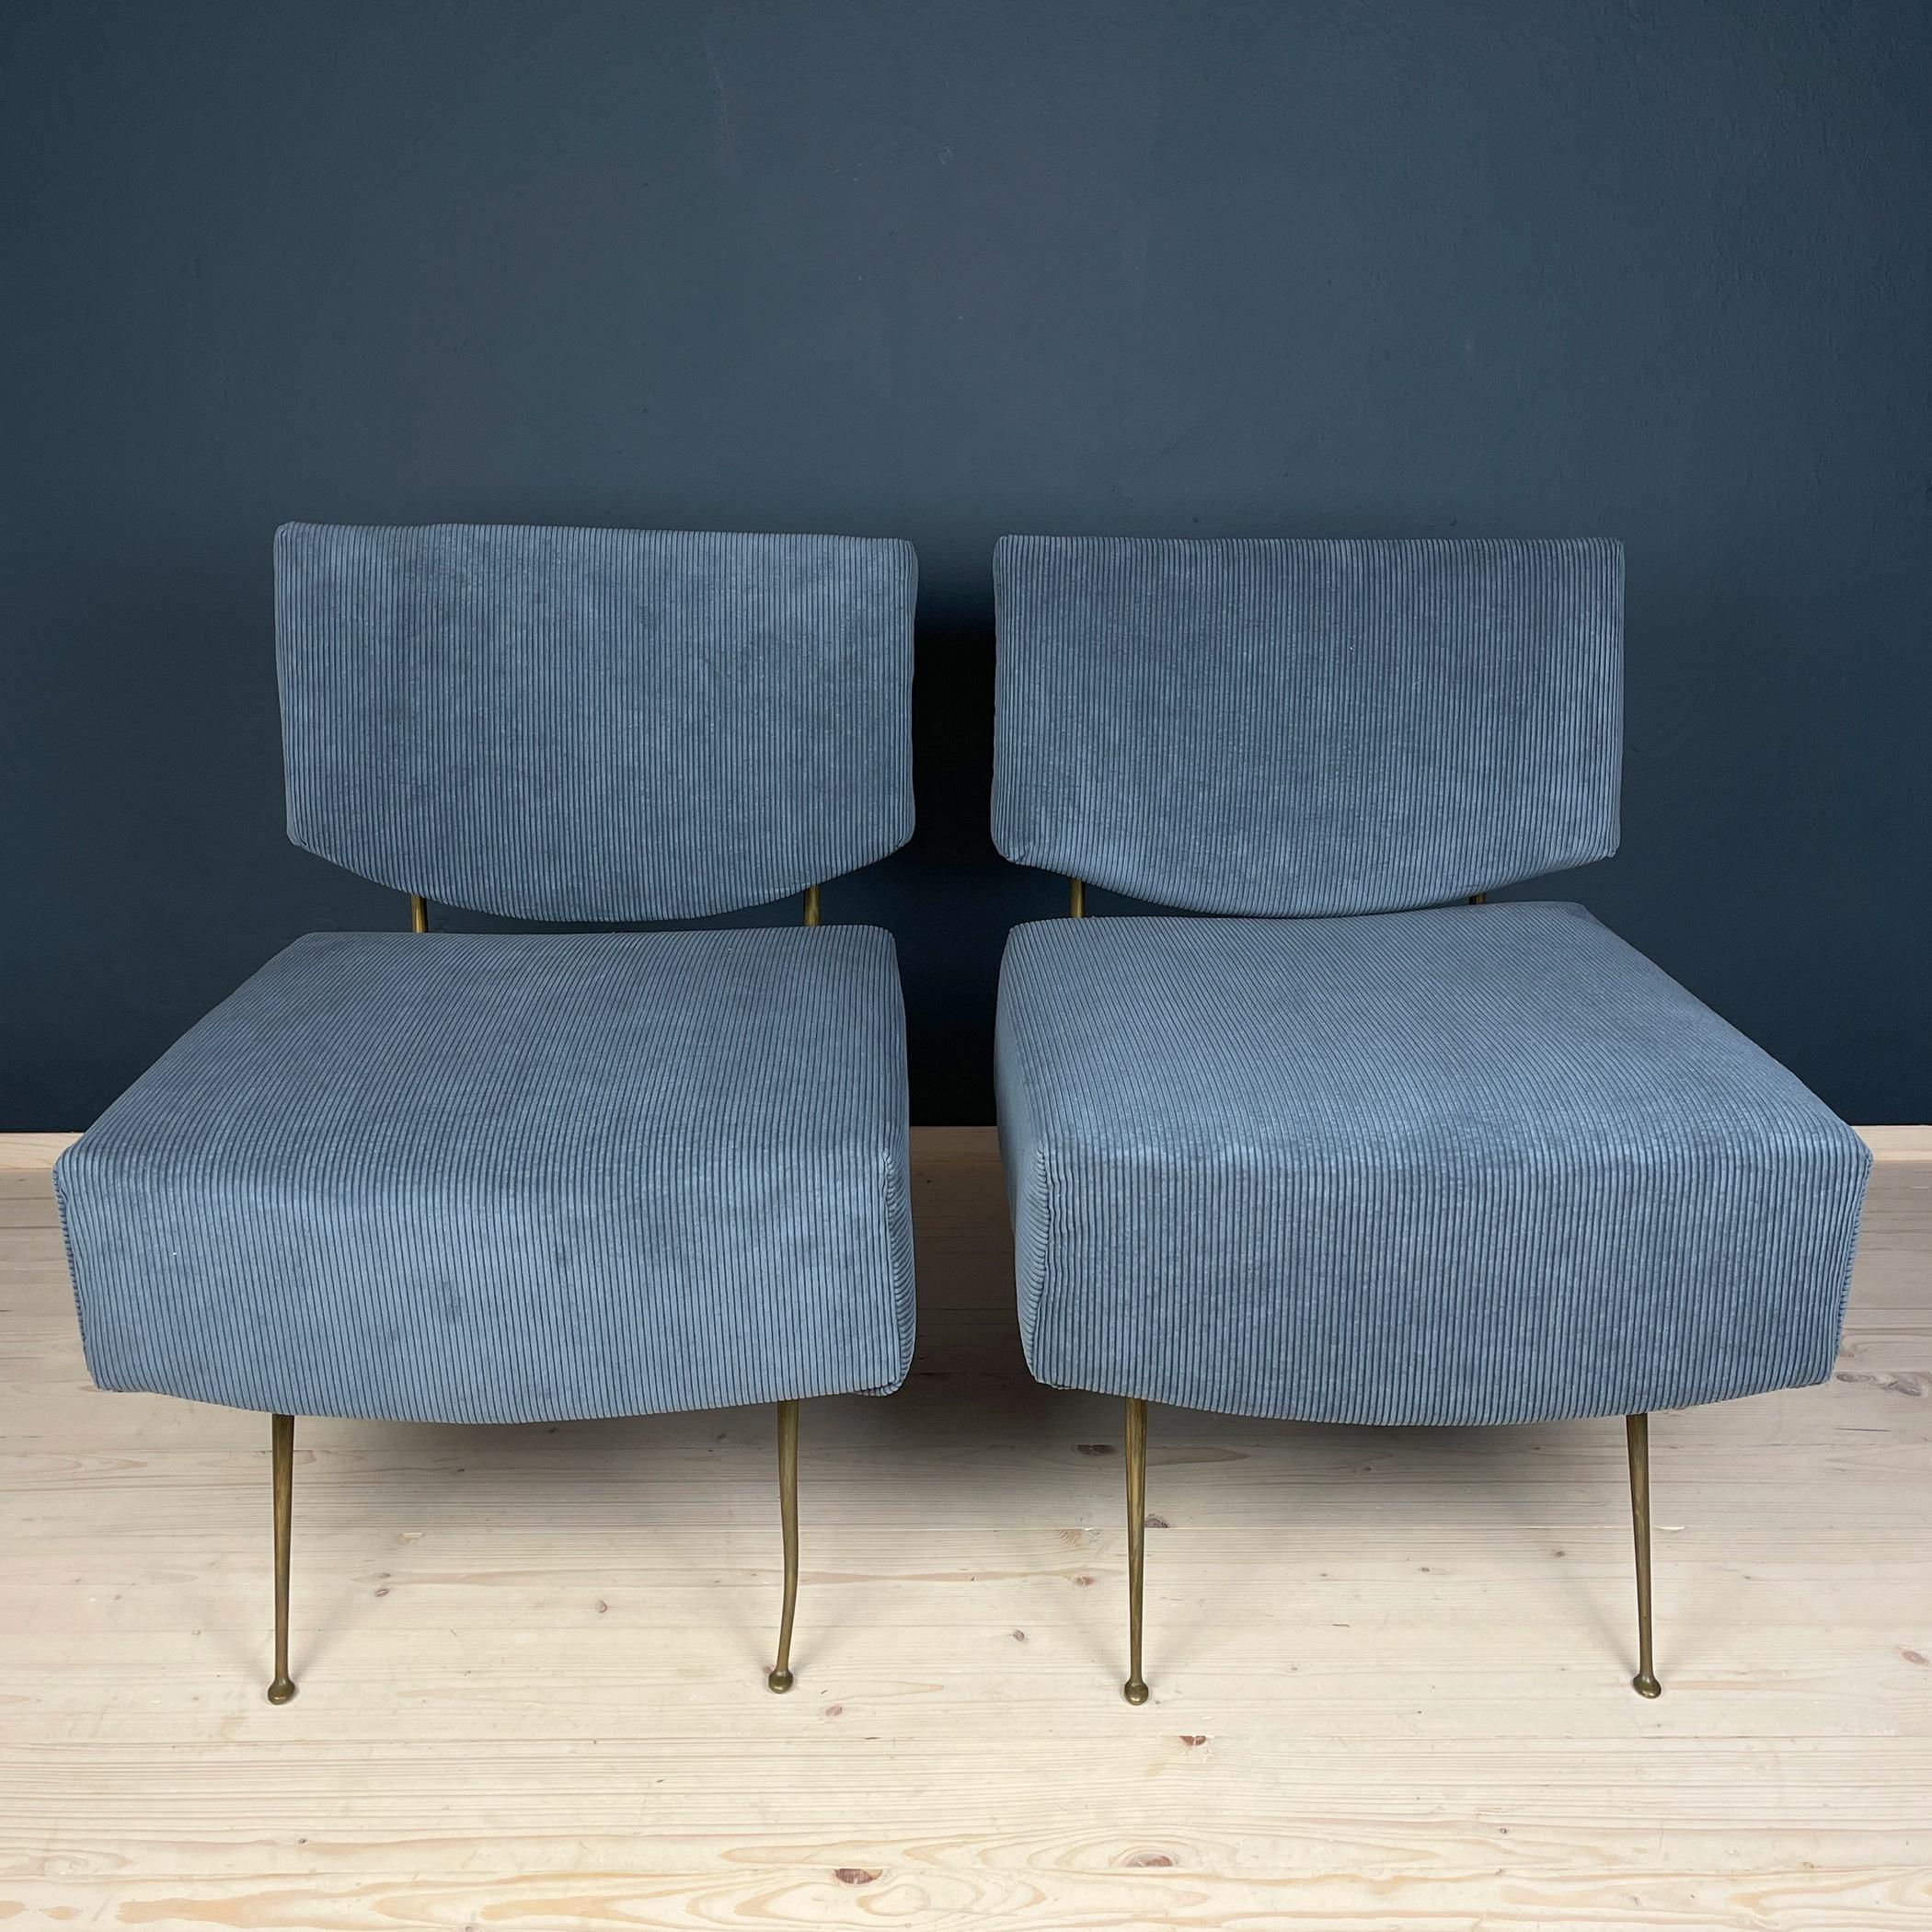 Introducing a remarkable pair of vintage lounge chairs from Italy, dating back to the 1950s. These exquisite pieces of Italian furniture effortlessly blend mid-century style with the comforts of home. Adorned in inviting blue corduroy fabric